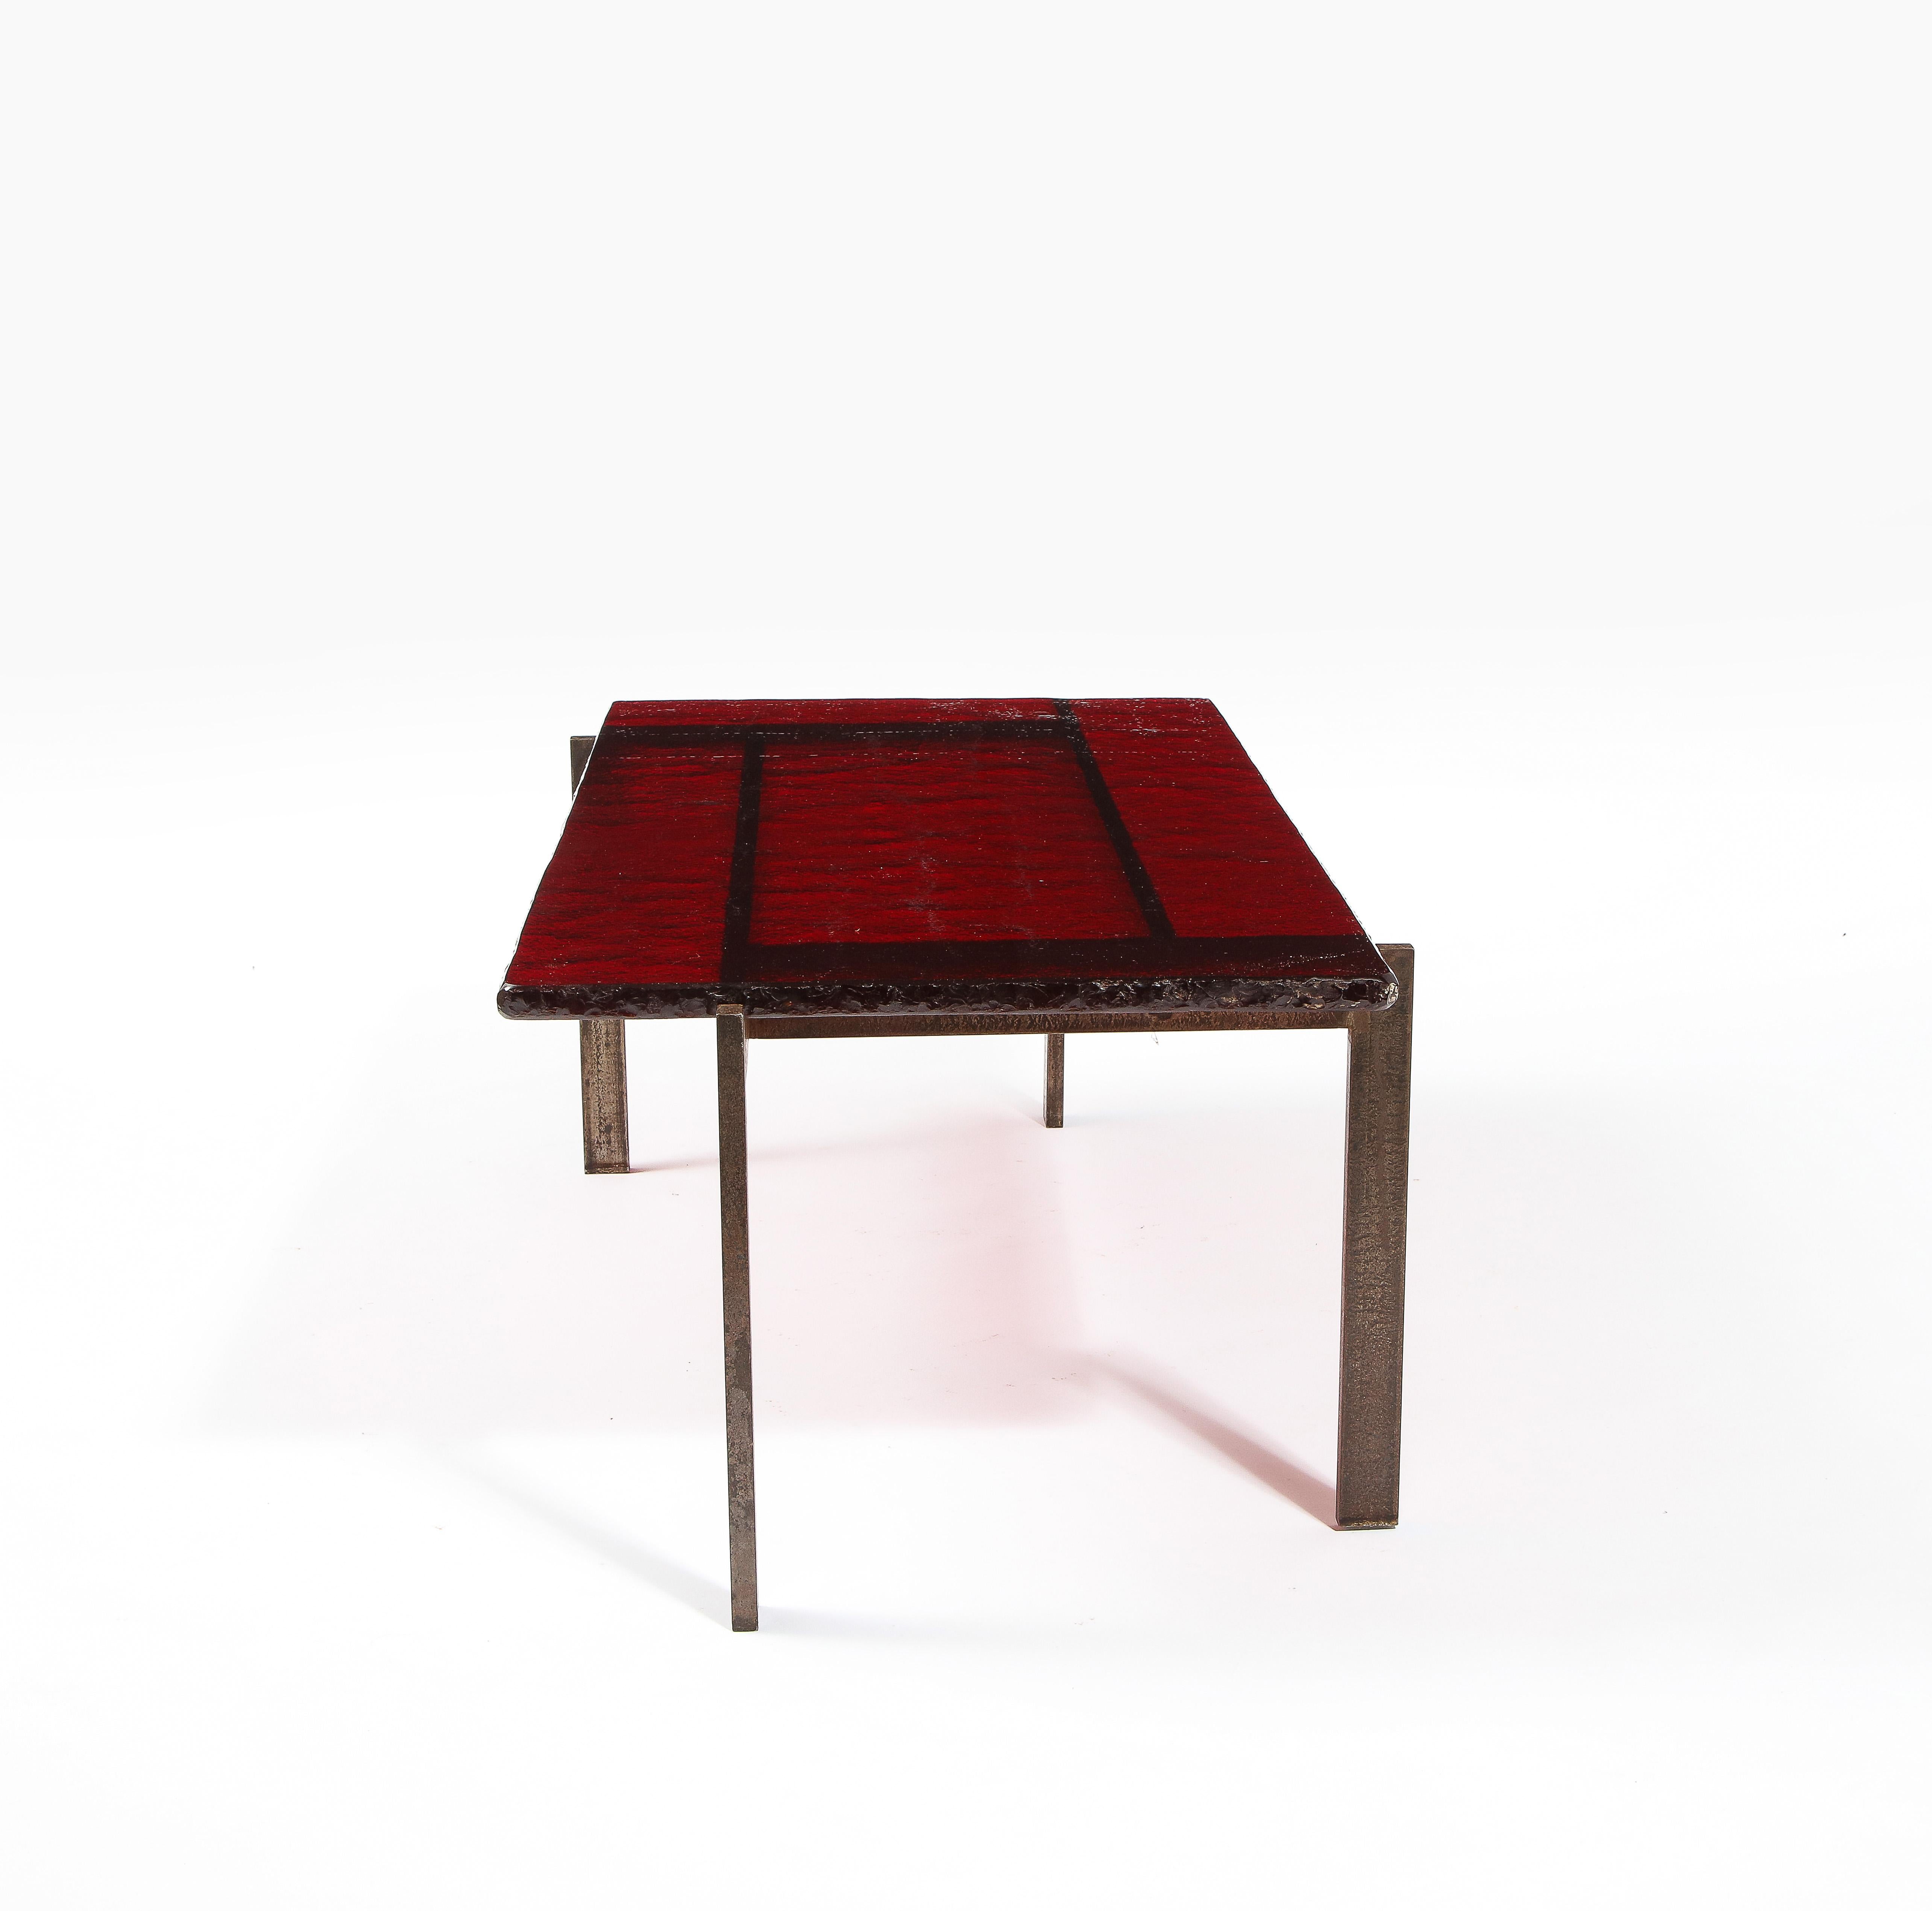 Ruby Red Saint Gobain Glass & Steel Modernist Coffee Table, France 1960's For Sale 5